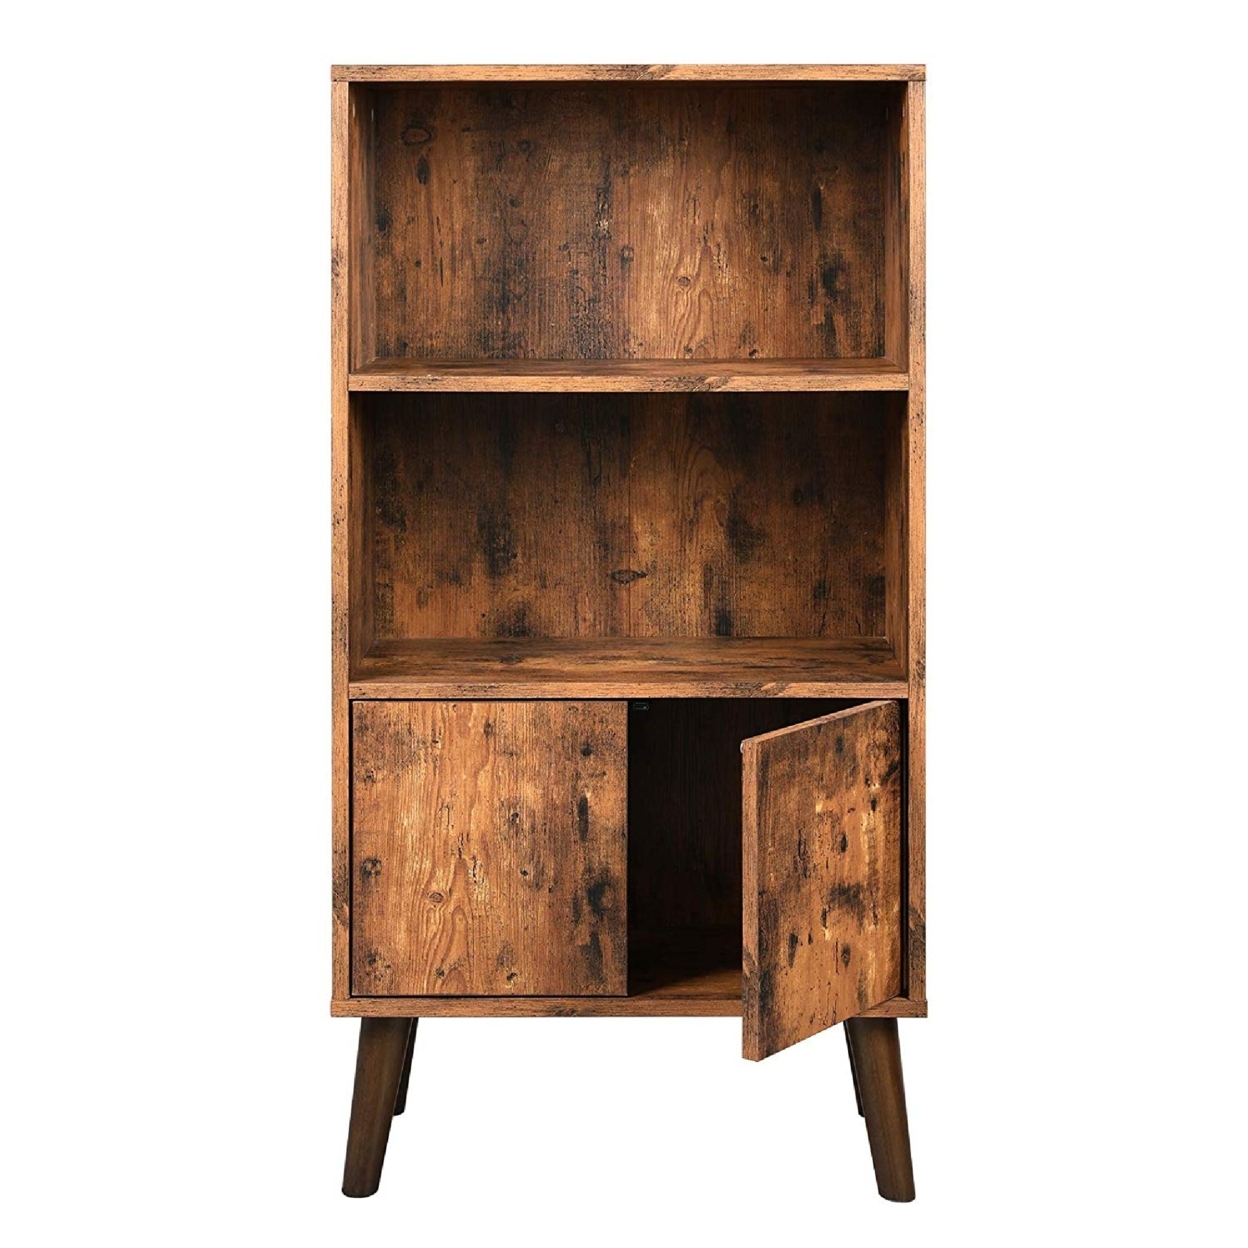 2 Tier Wooden Bookshelf With Storage Cabinet And Angled Legs, Brown- Saltoro Sherpi